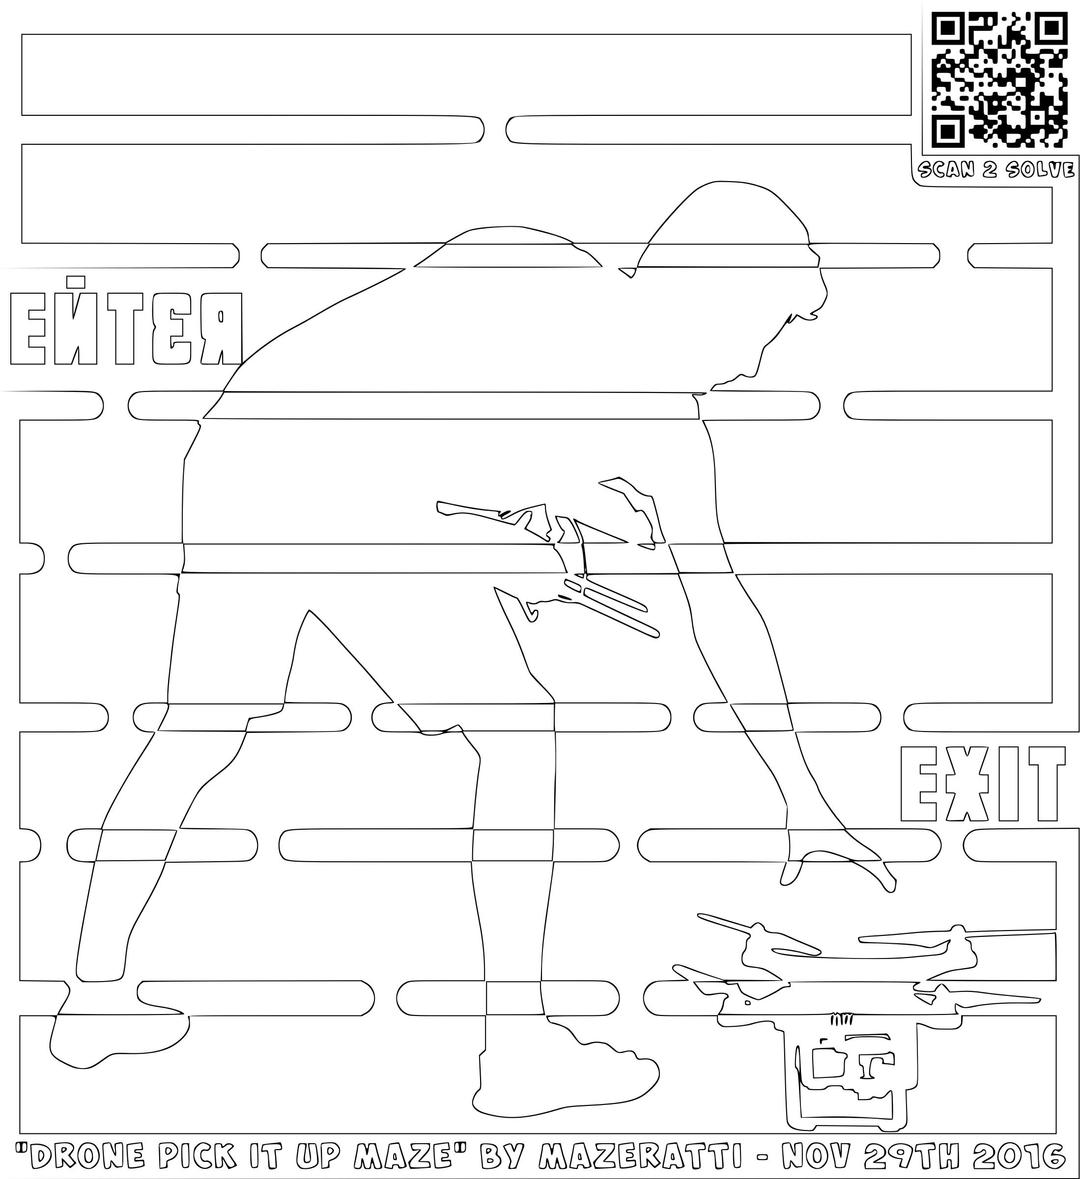 Coloring Page Maze of Picking Up That Drone png transparent